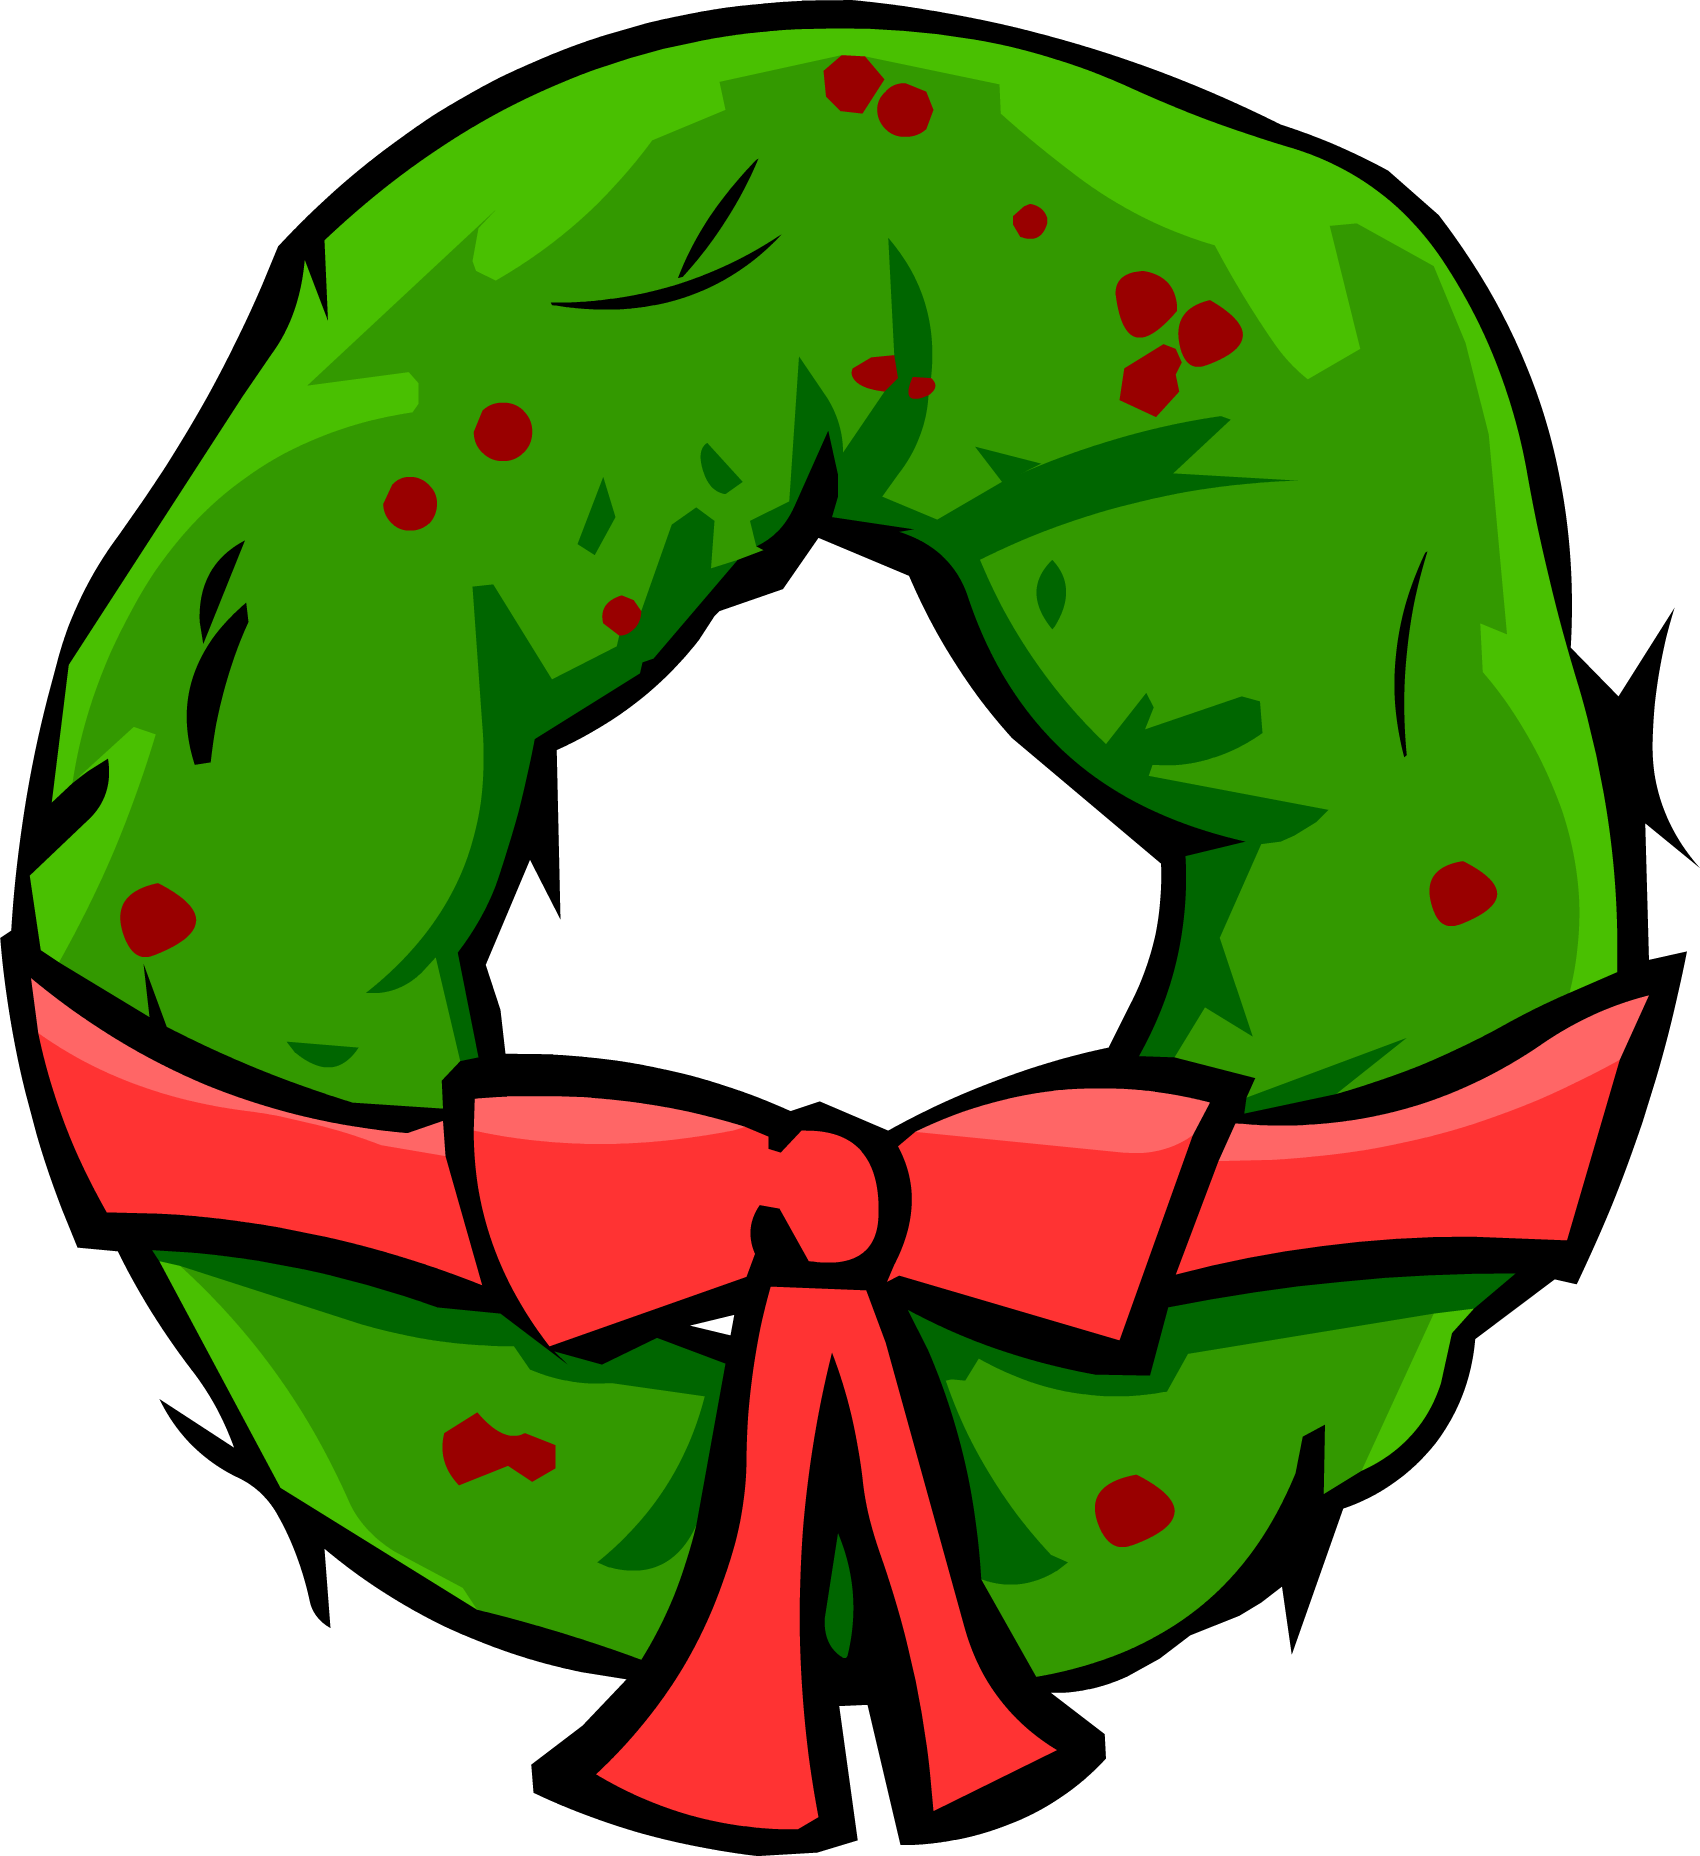 Image wreath png club. Jacket clipart christmas